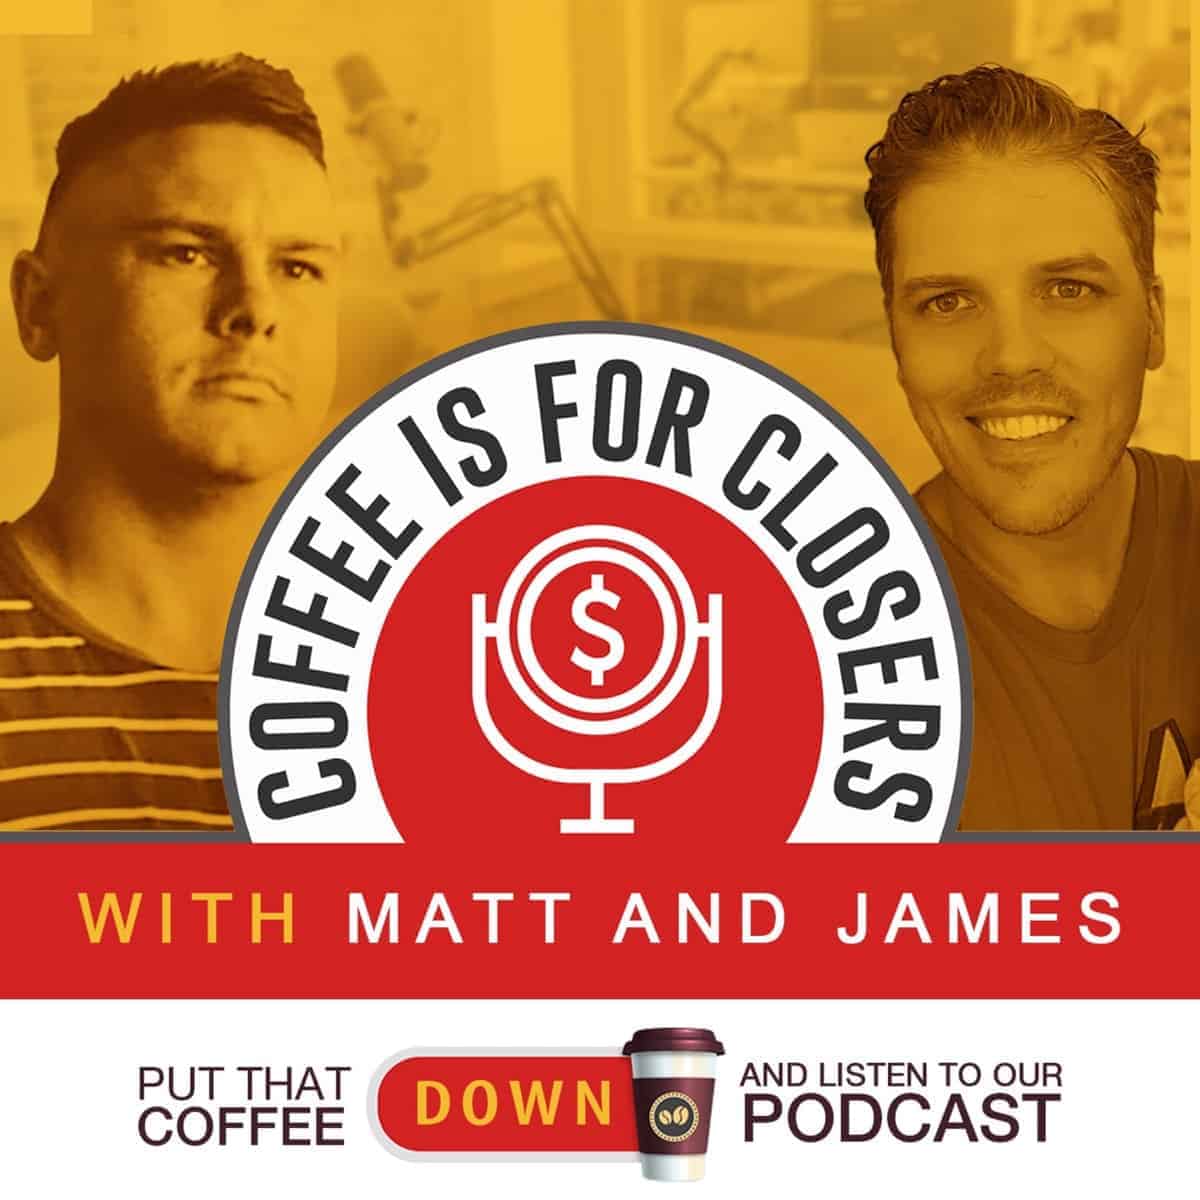 Coffee Is For Closers Podcast
